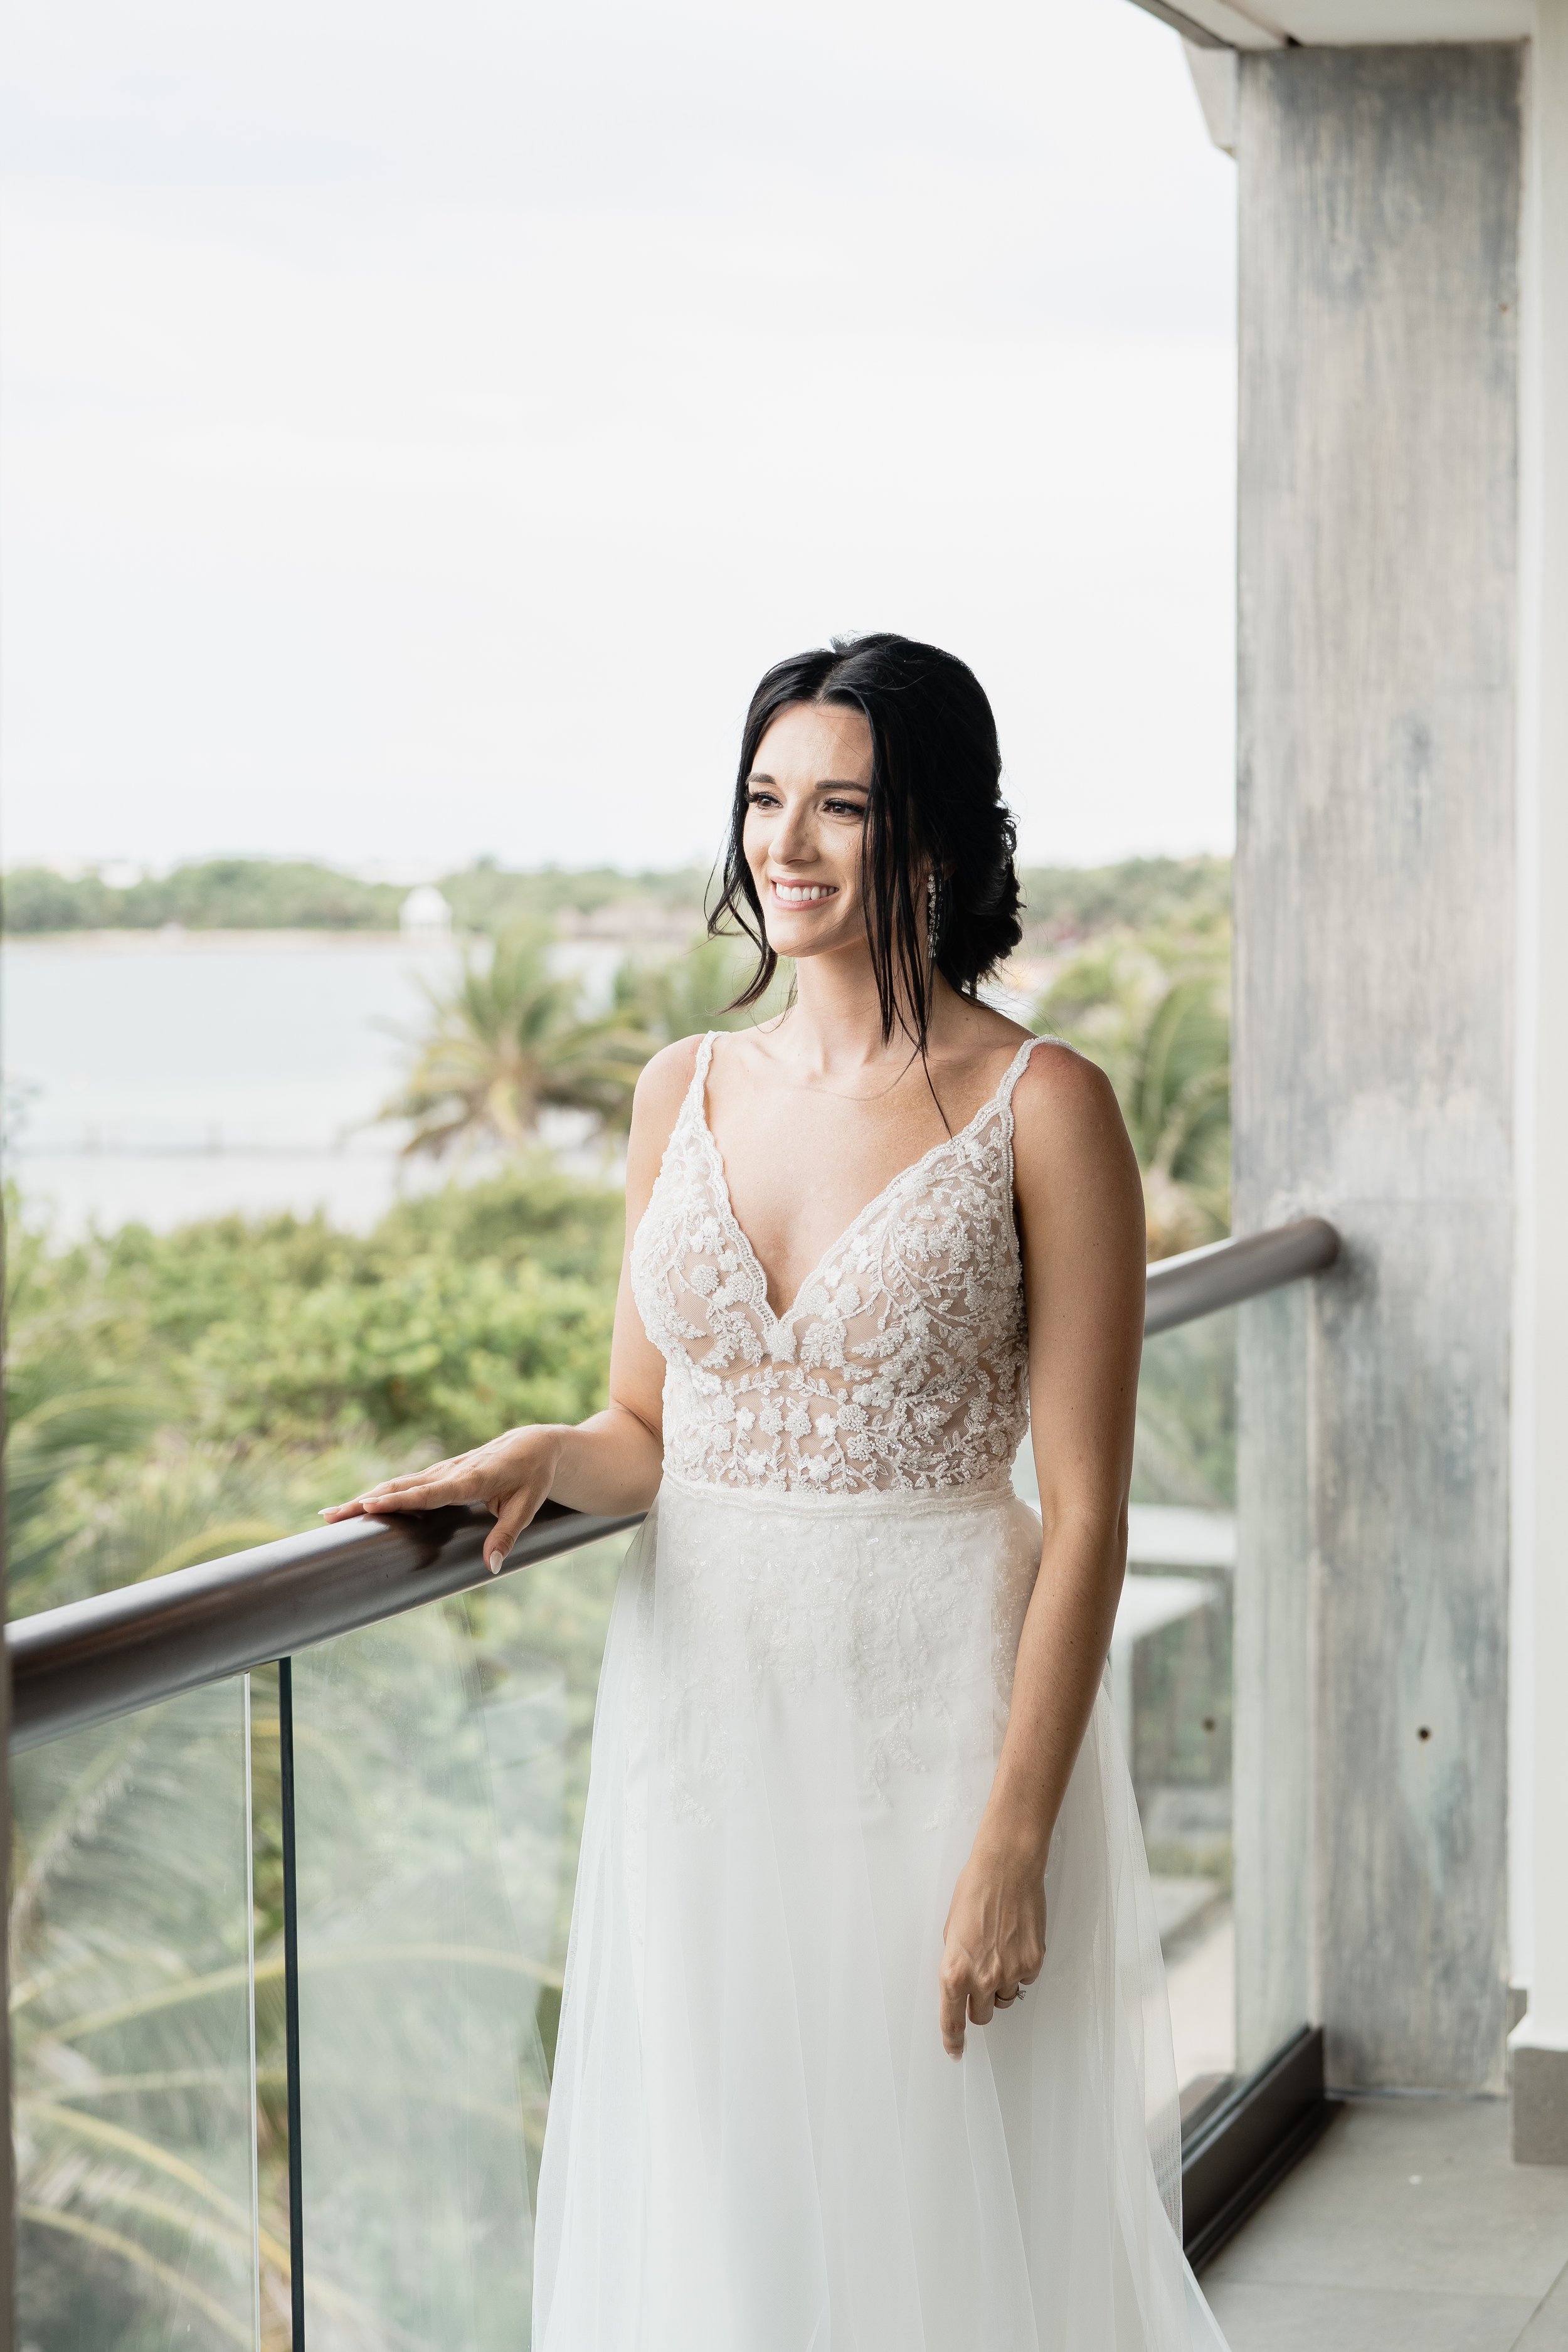 ivory-and-beau-bride-alyssa-in-carmen-by-rebecca-ingram-a-romantic-a-line-floral-lace-wedding-dress-purchased-from-savannah-bridal-shop-ivory-and-beau-2.jpg